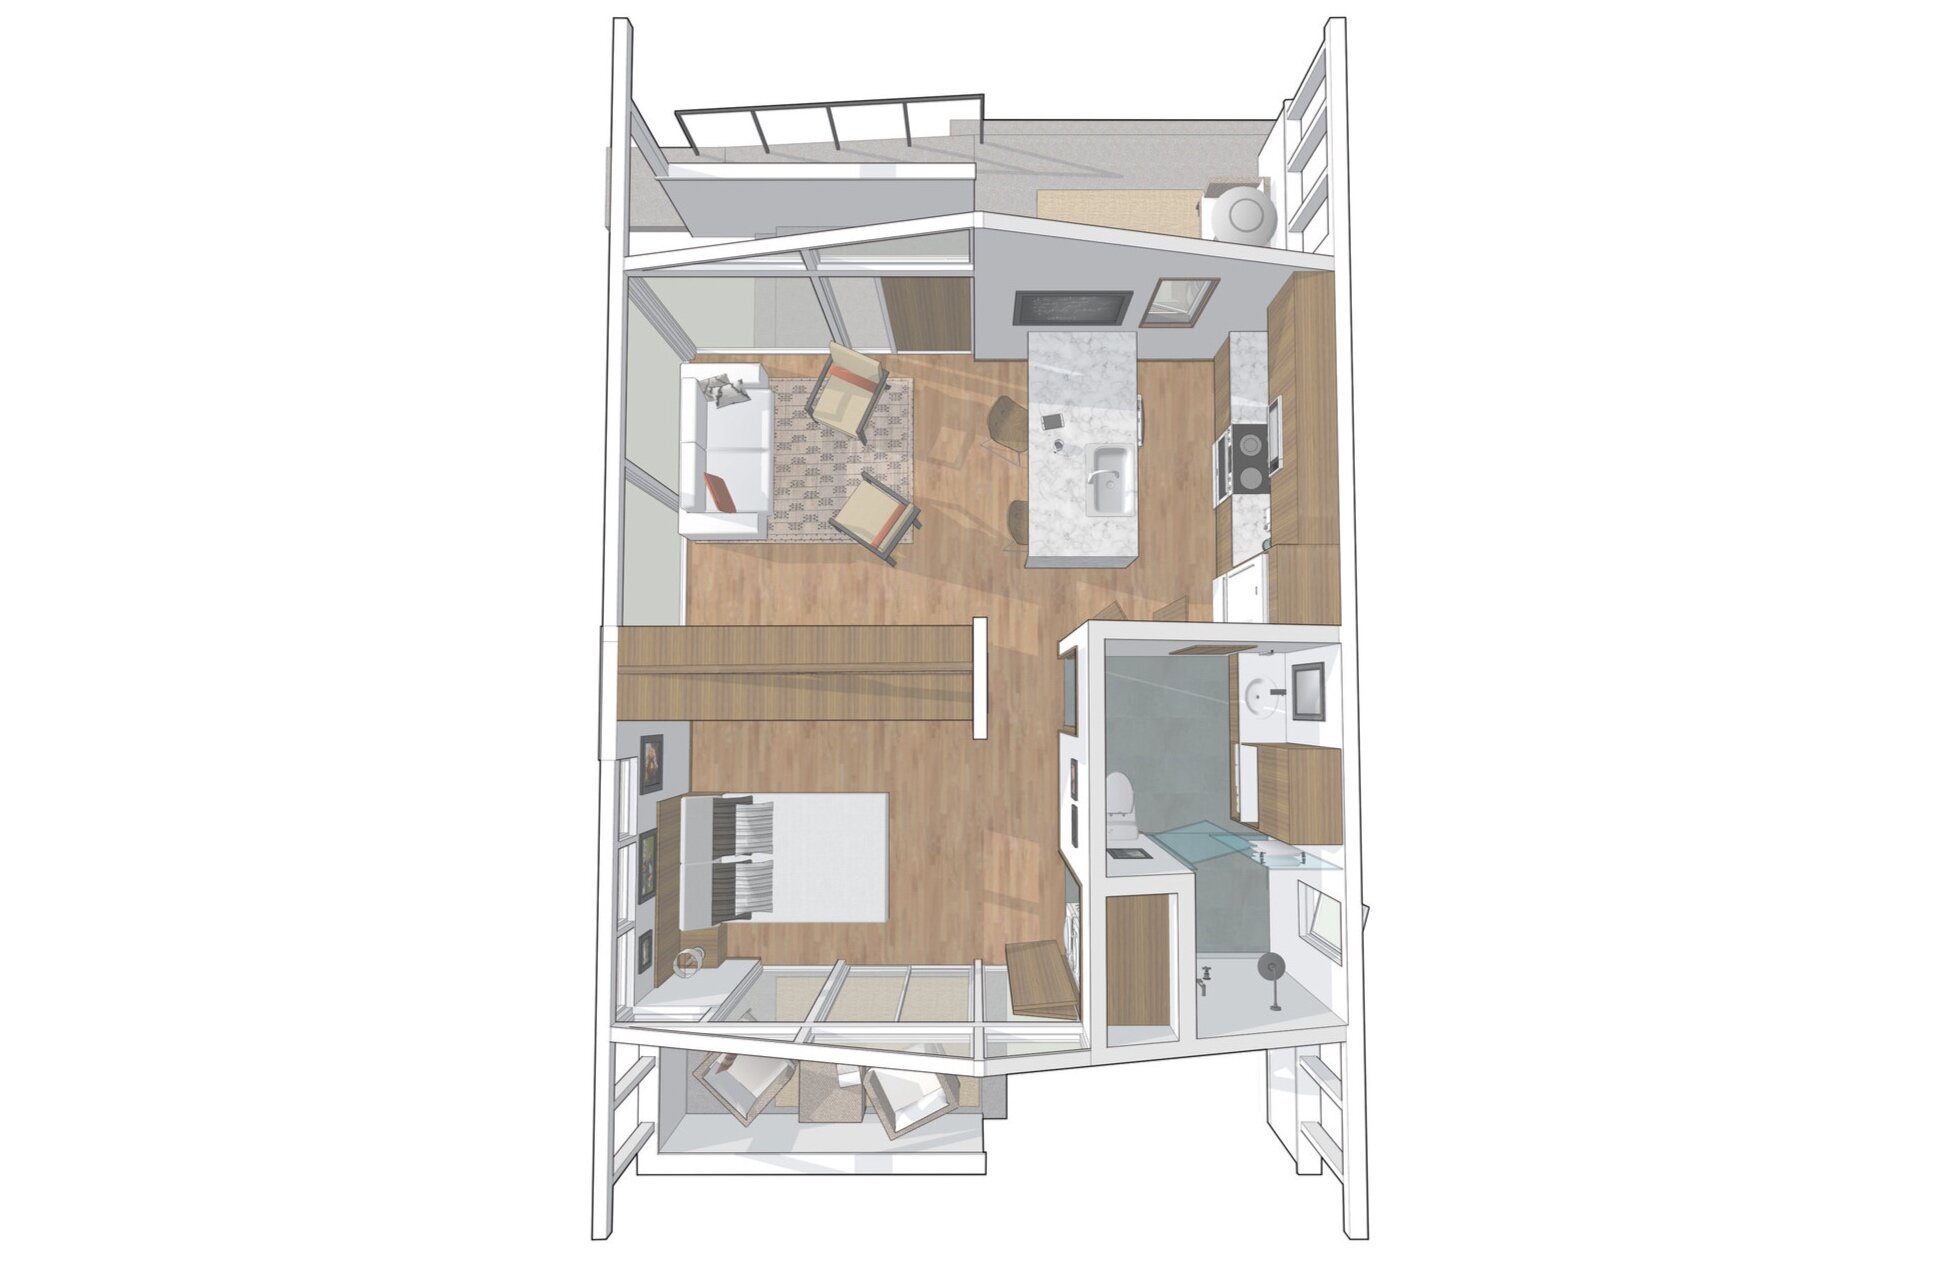   Floorplan opens to the outdoors increases the sense of space as does a minimum of framed interior partitions, utilizing custom cabinetry to accommodate the widest range of needs.  